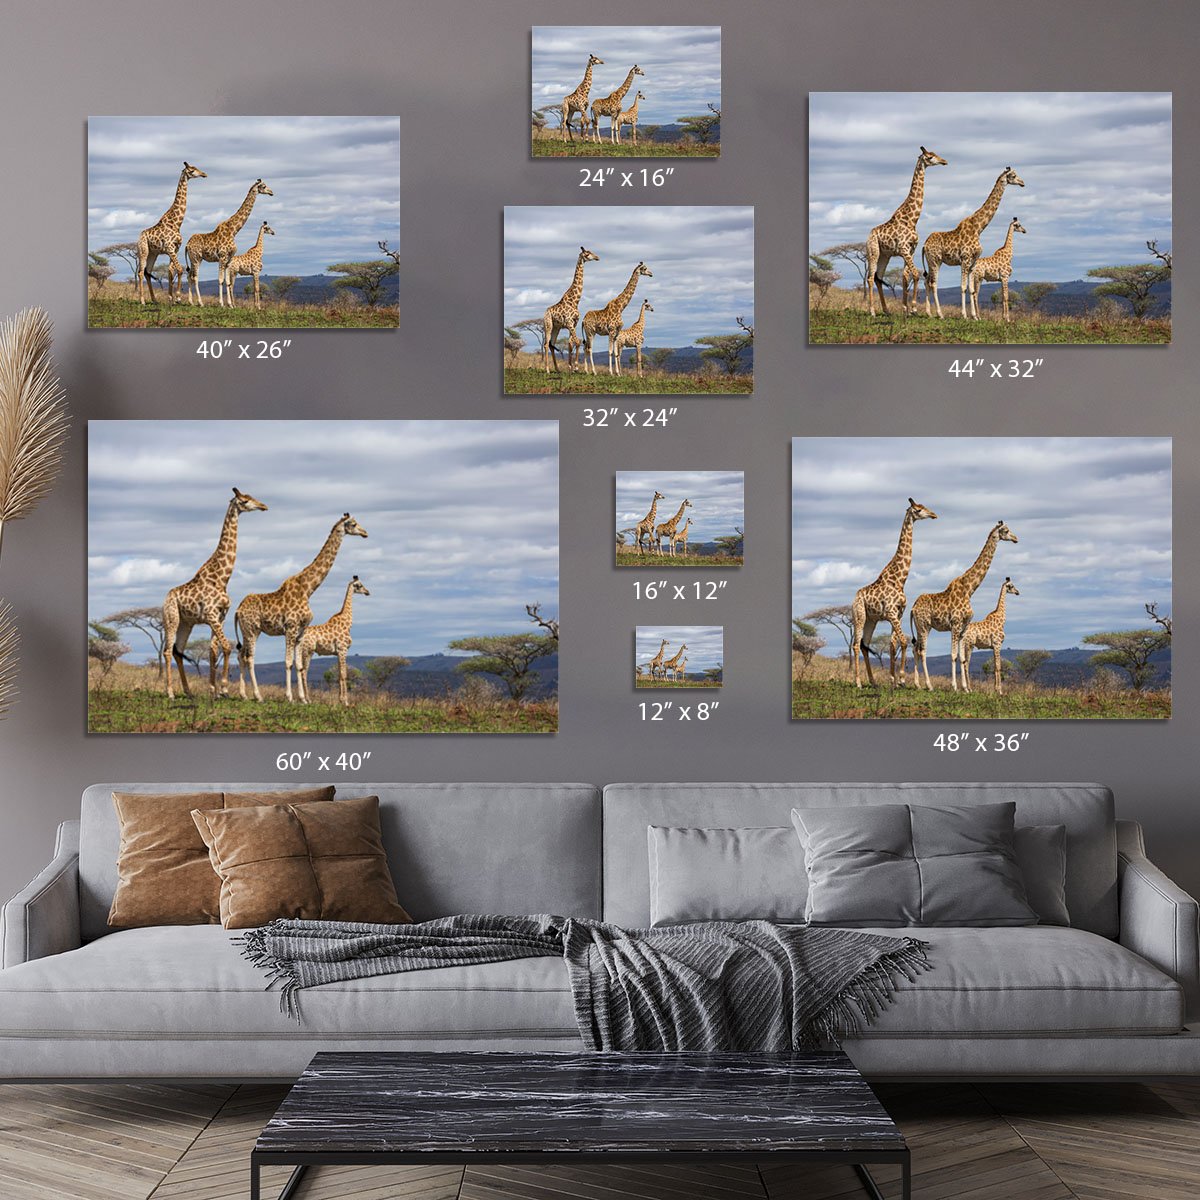 Giraffes in south africa game reserve Canvas Print or Poster